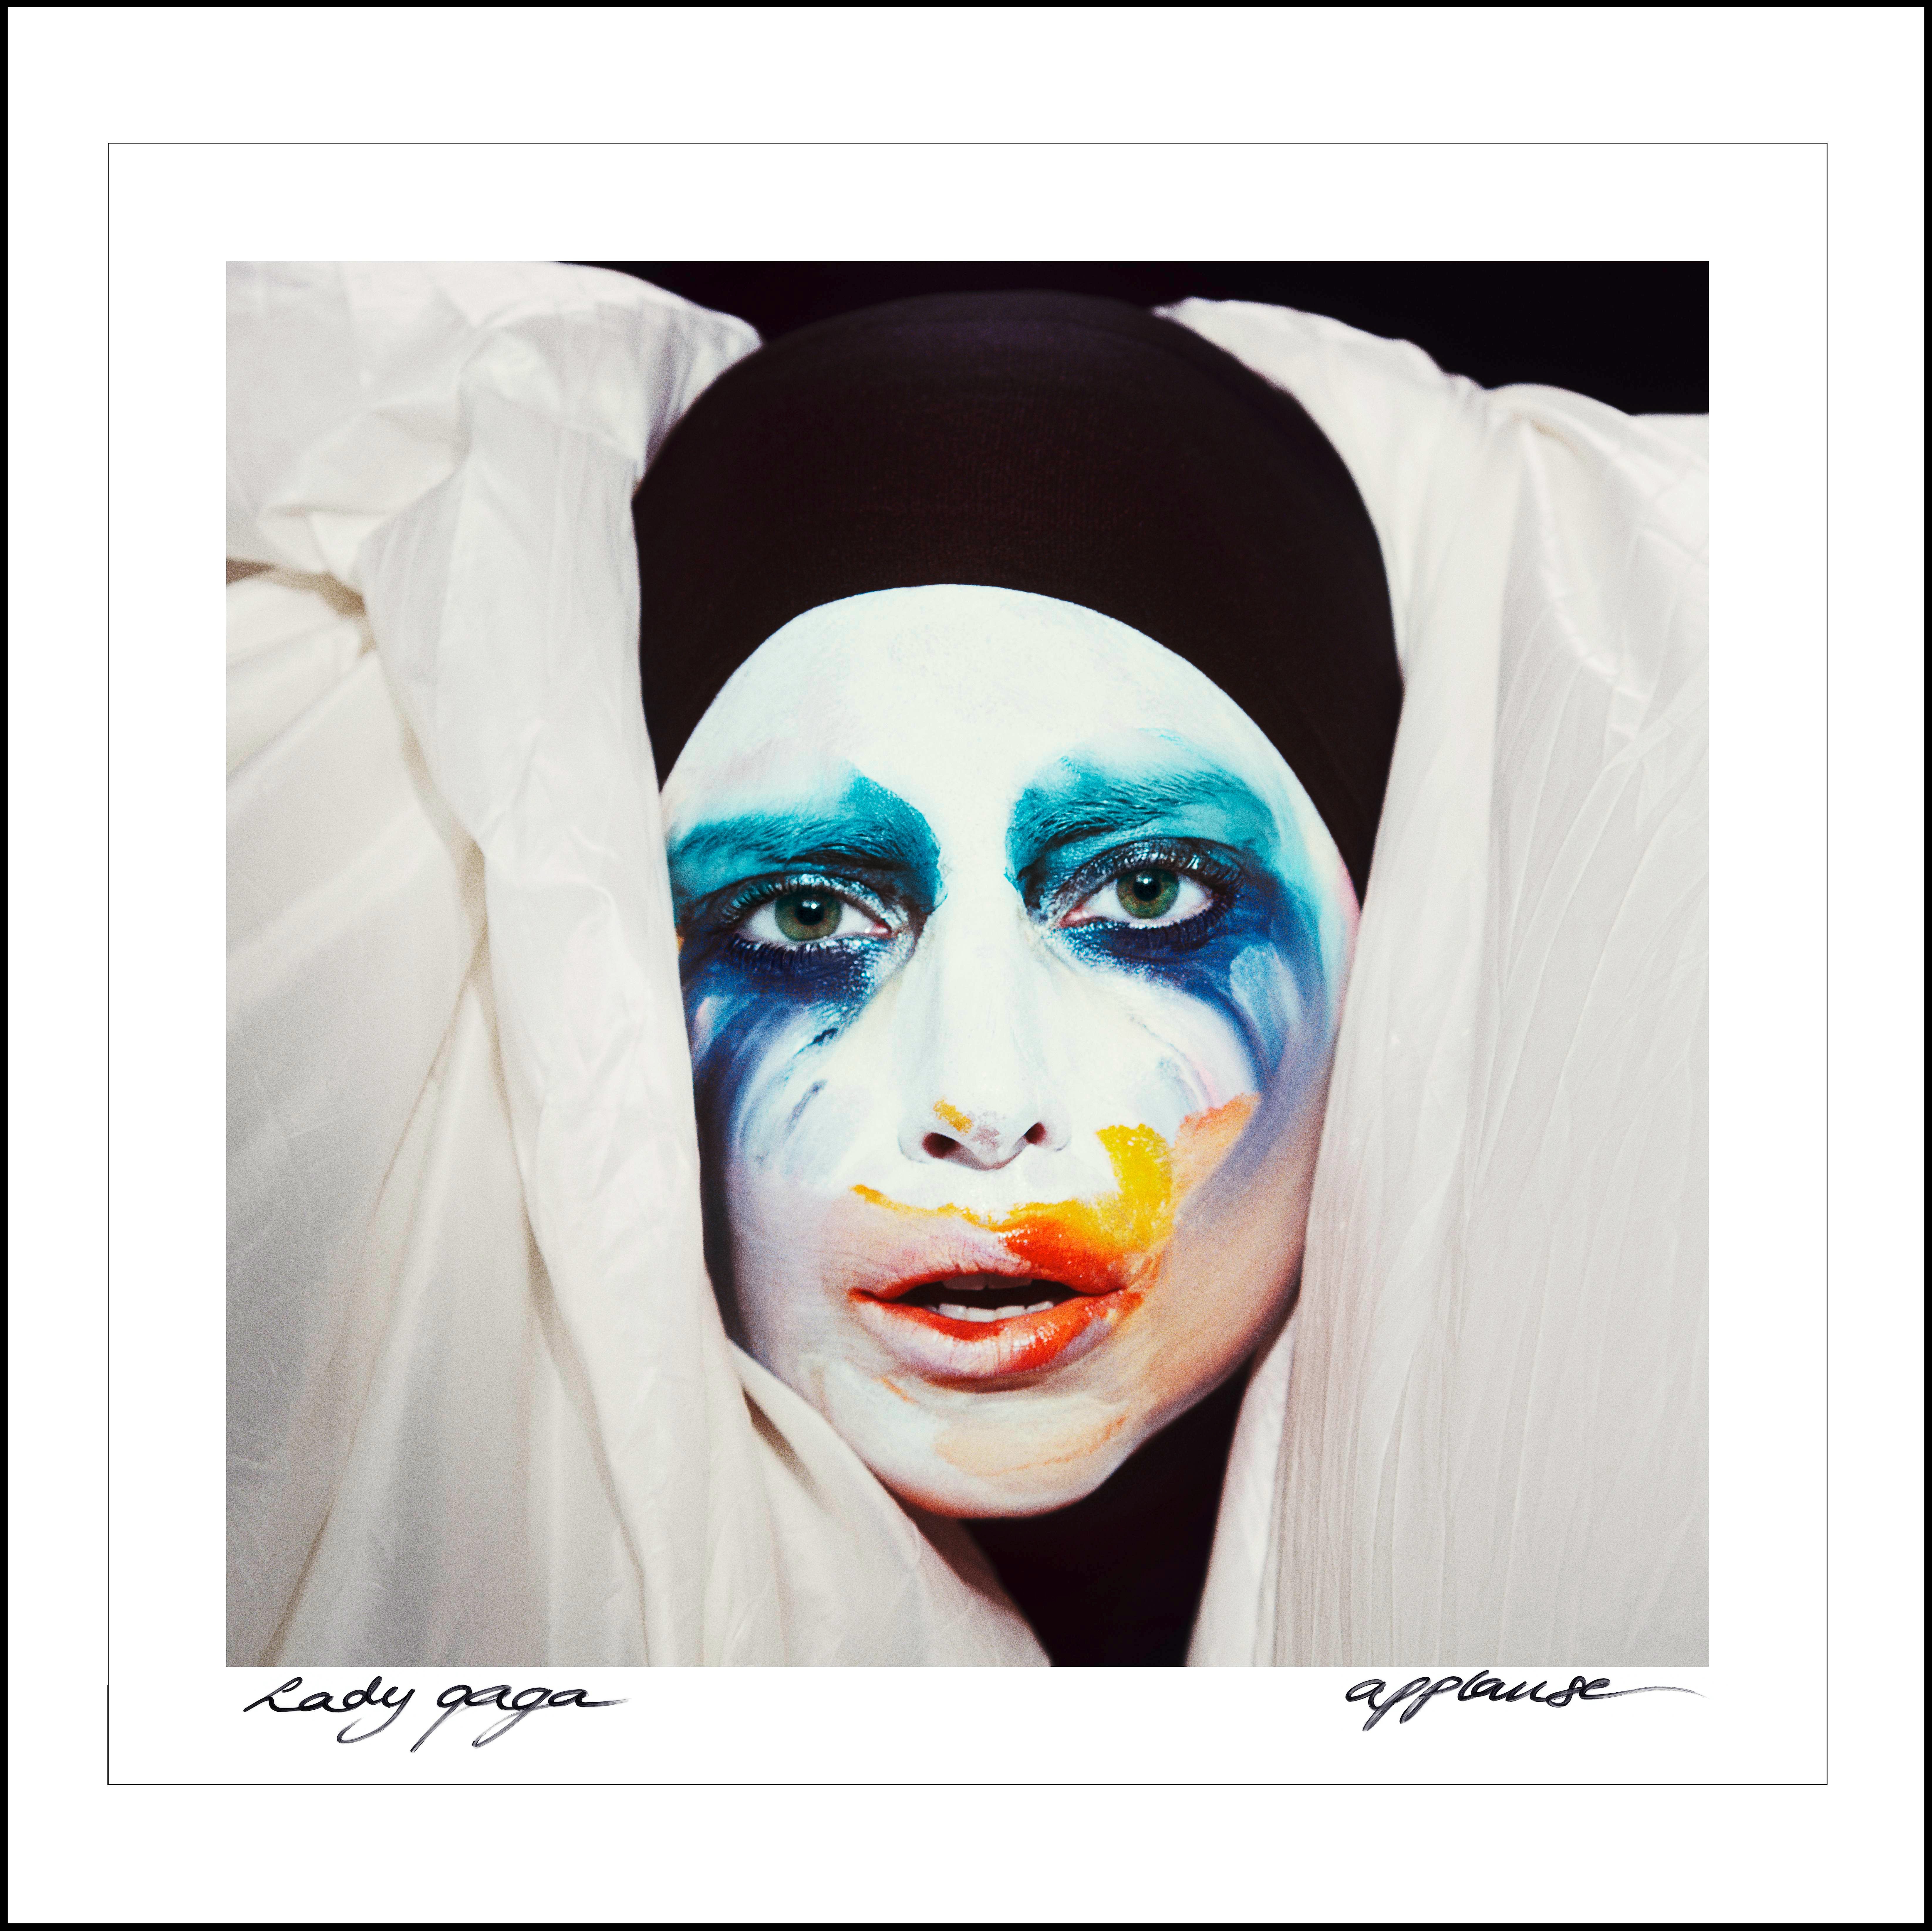 Applause_cover.jpg